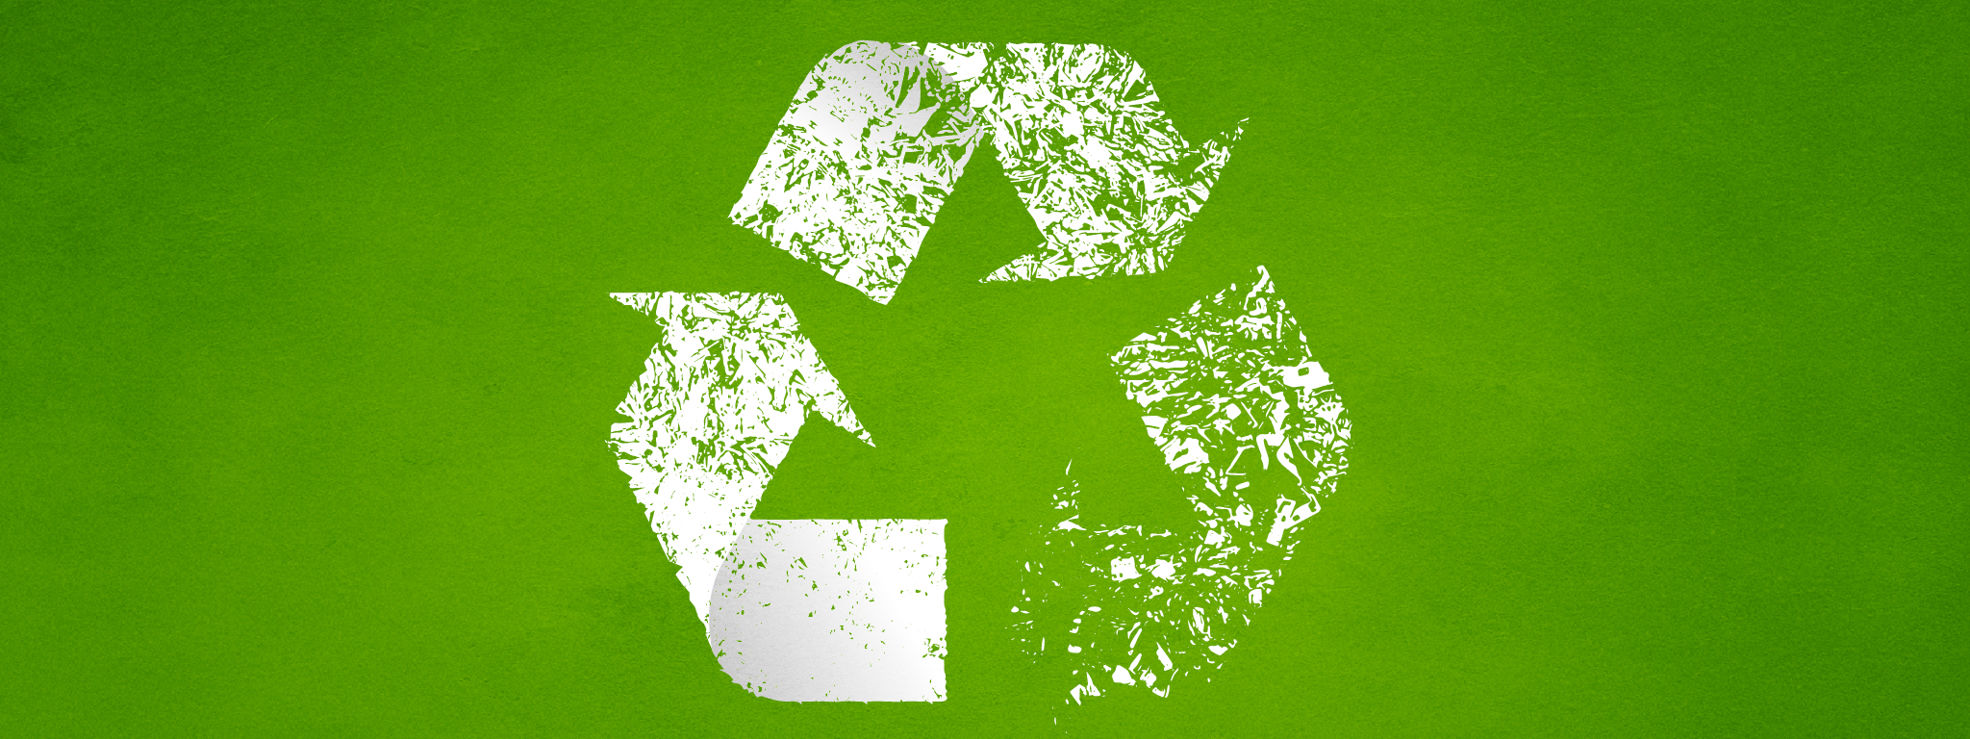 Recycling is a key factor in a circular economy